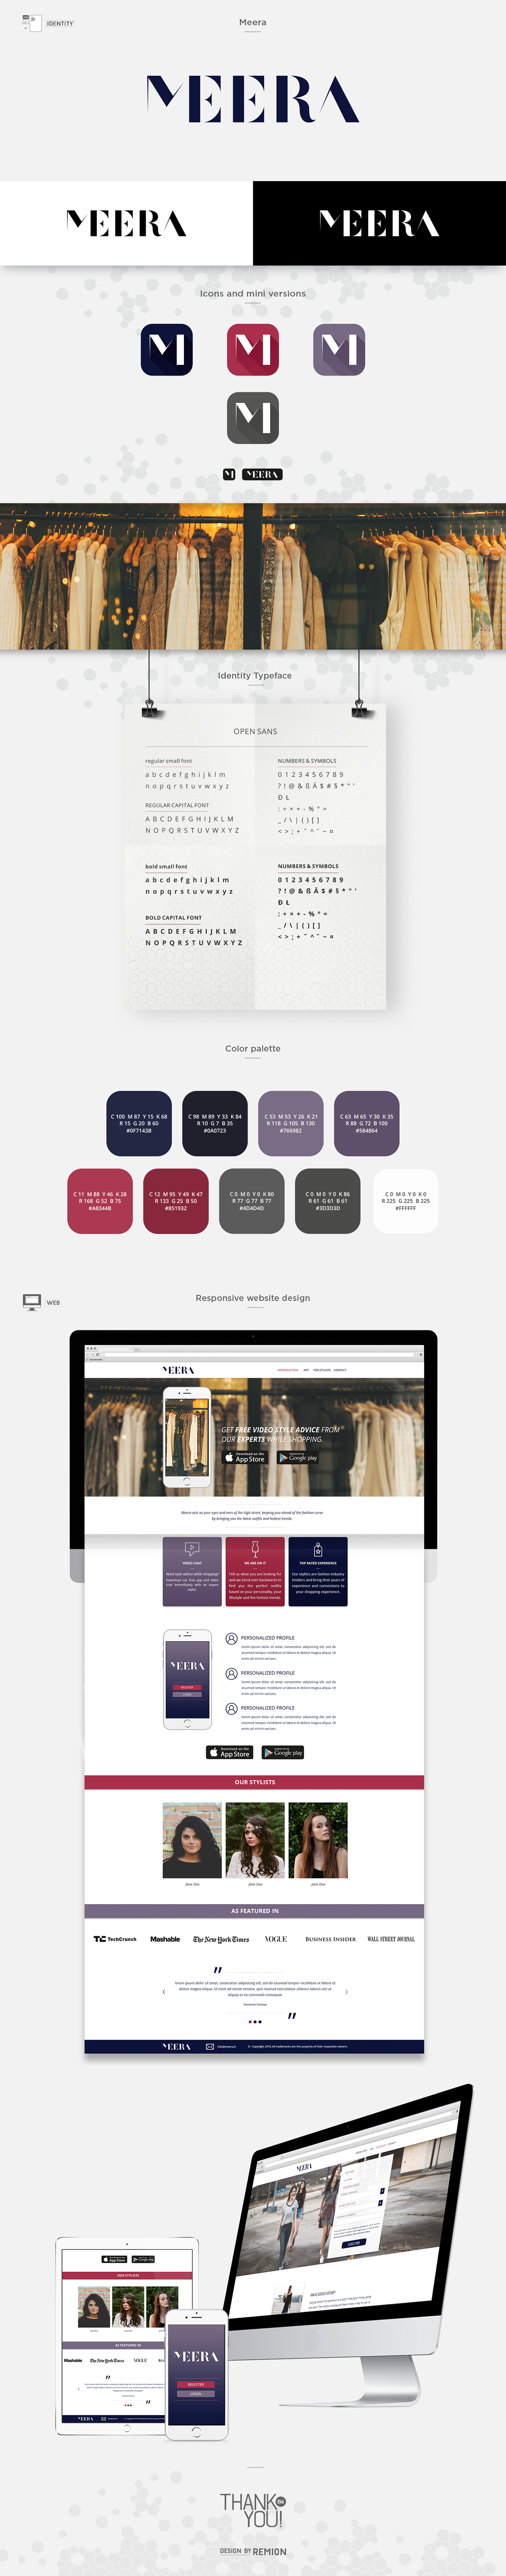 Remion meera identity Logotype Responsive Website mobile tablet Typeface application